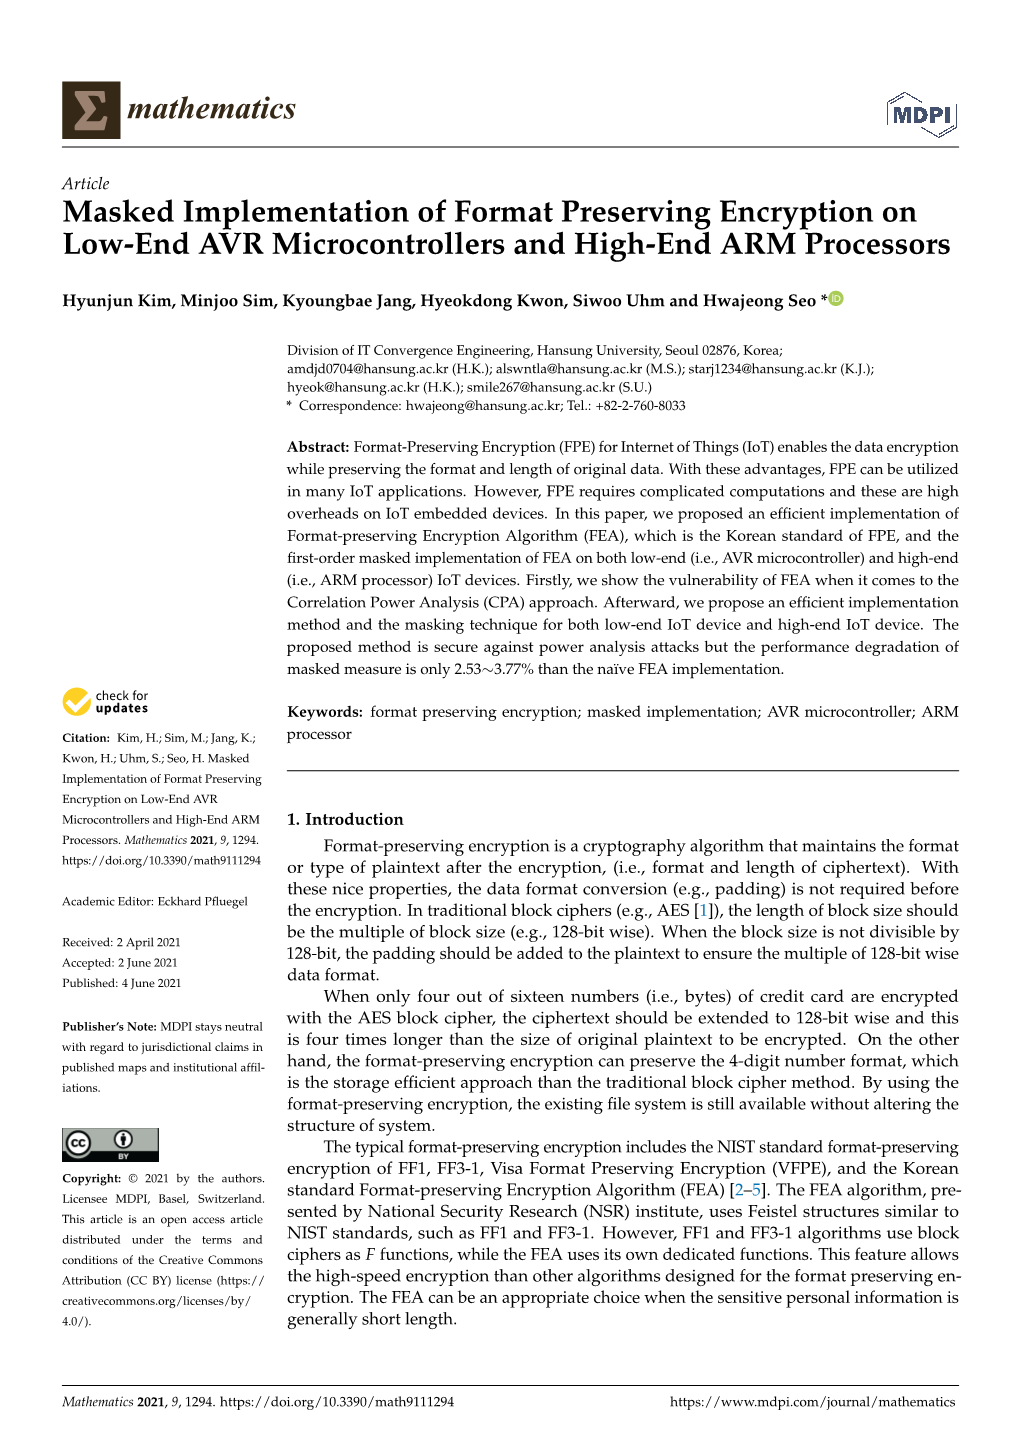 Masked Implementation of Format Preserving Encryption on Low-End AVR Microcontrollers and High-End ARM Processors